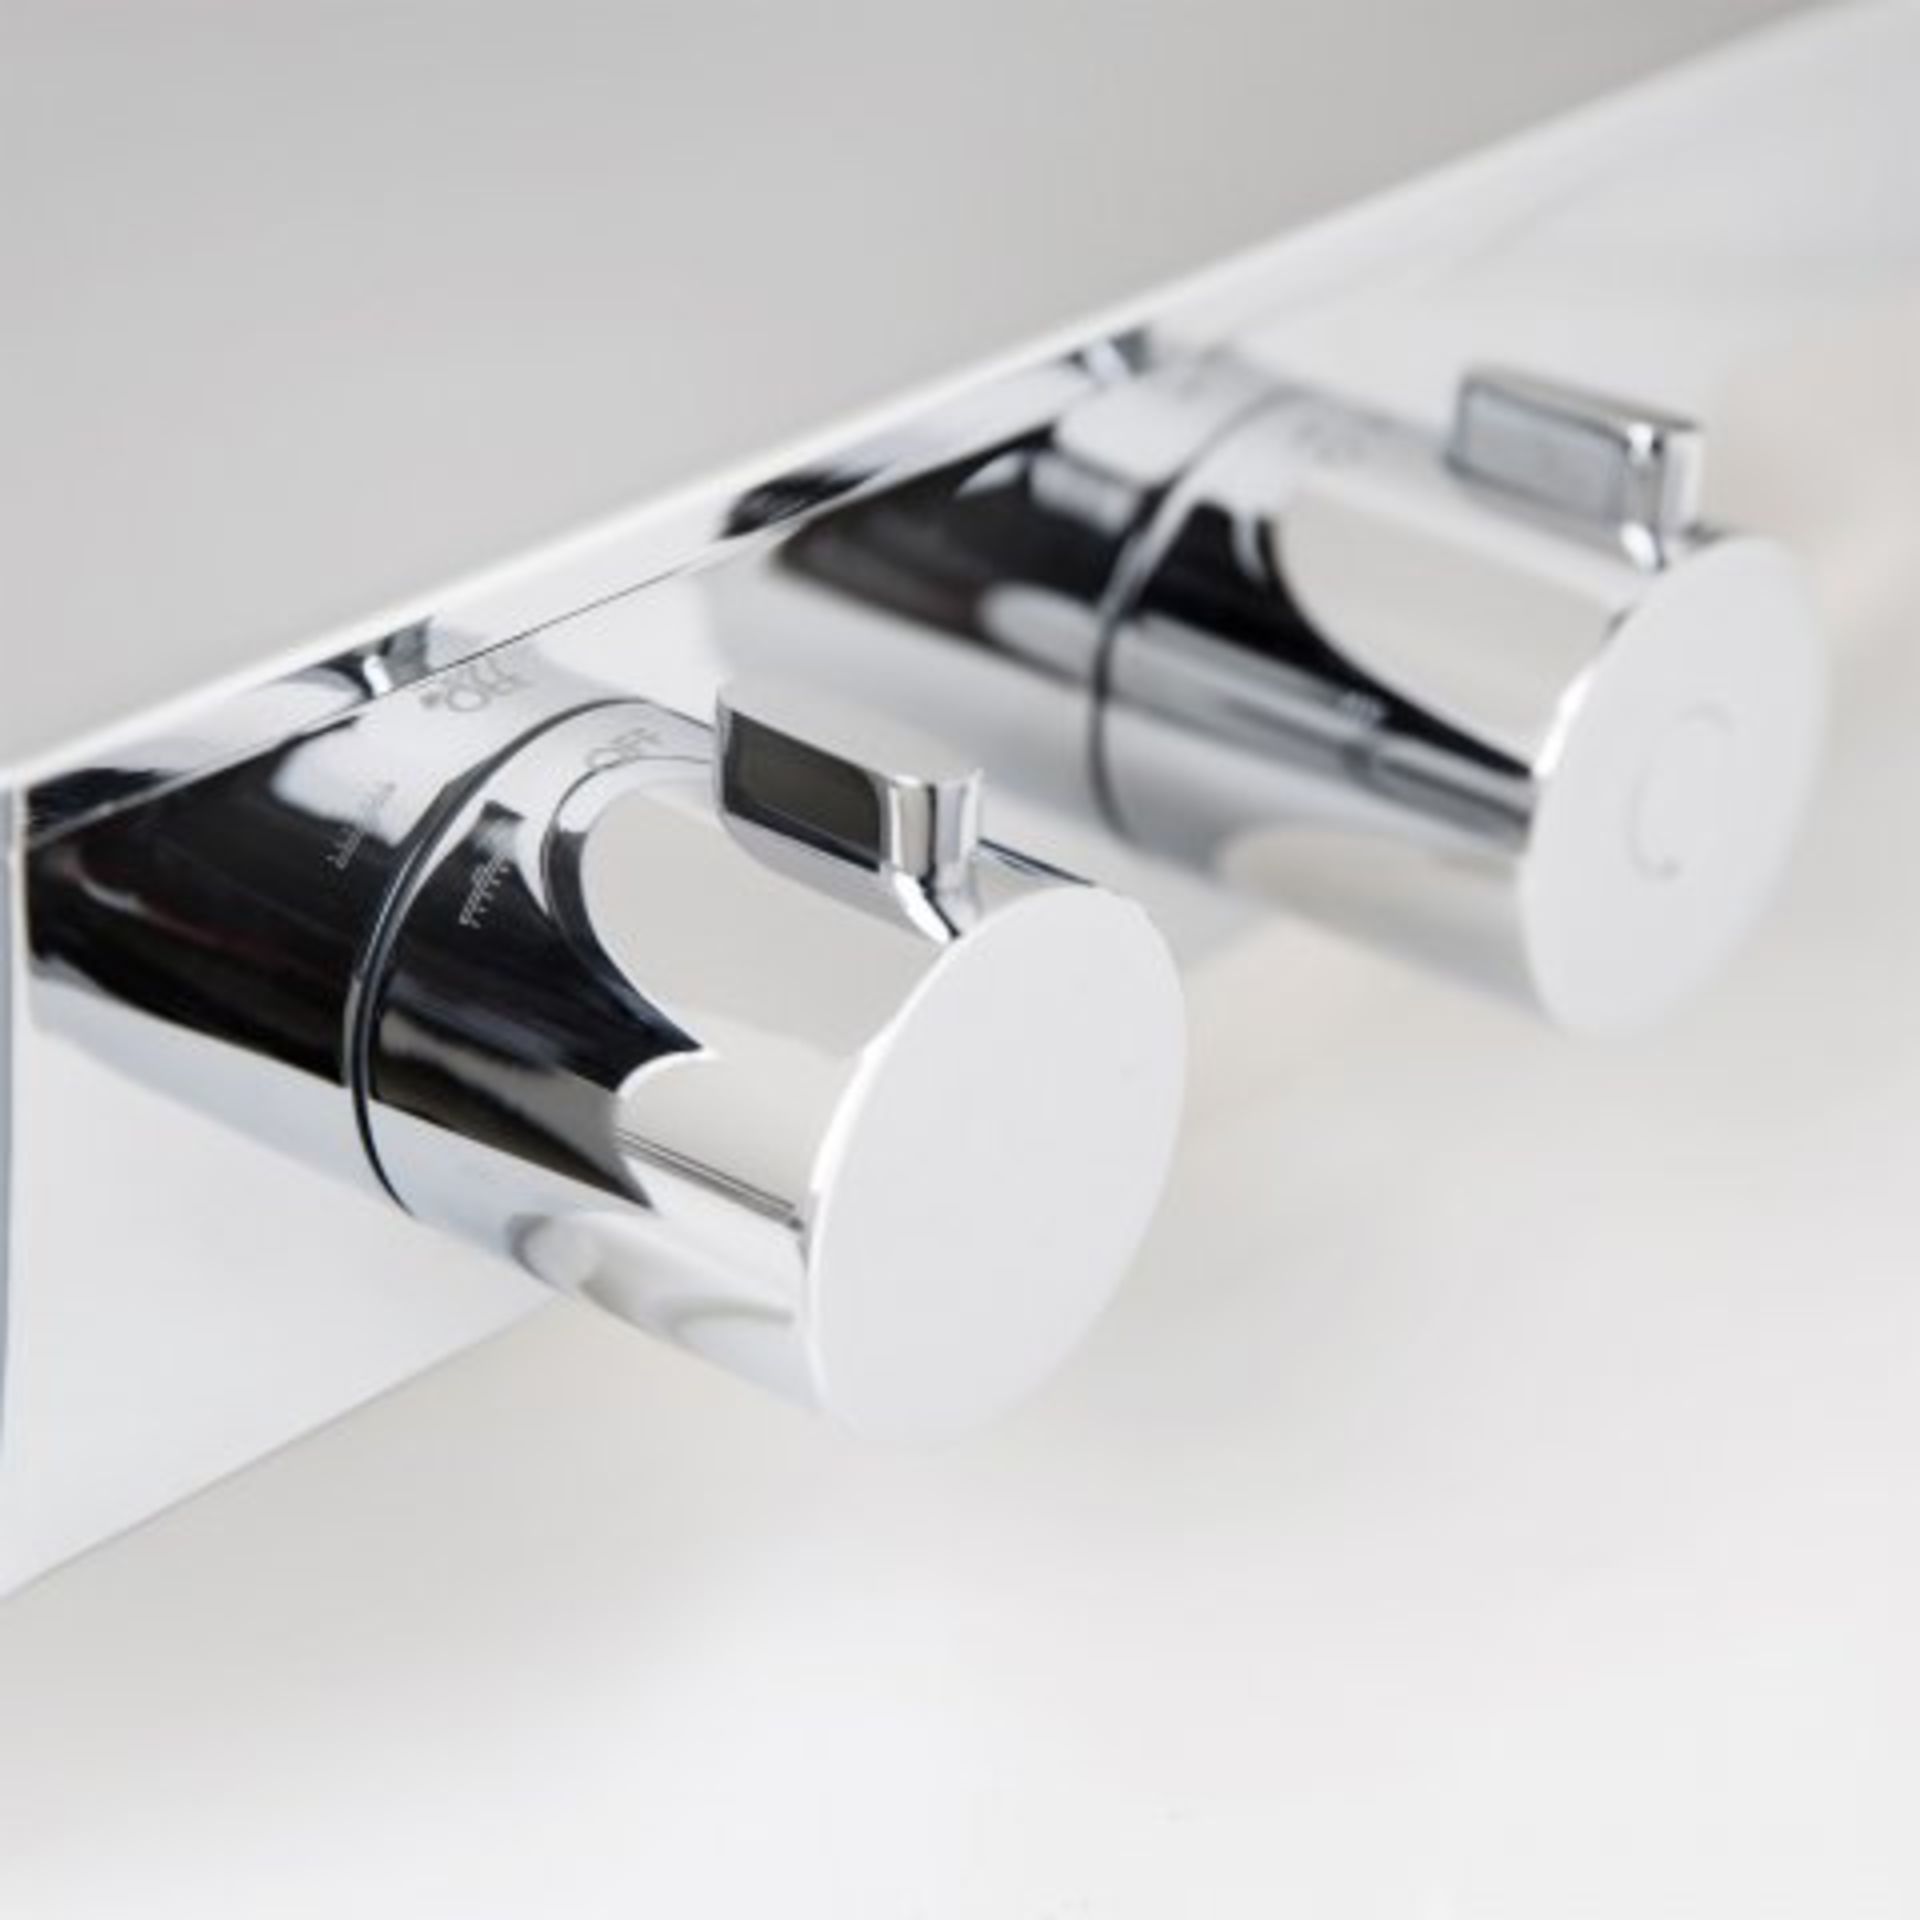 (2) 250mm Large Square Head Thermostatic Exposed Shower Kit, Handheld & Storage Shelf. RRP £349. - Image 5 of 5